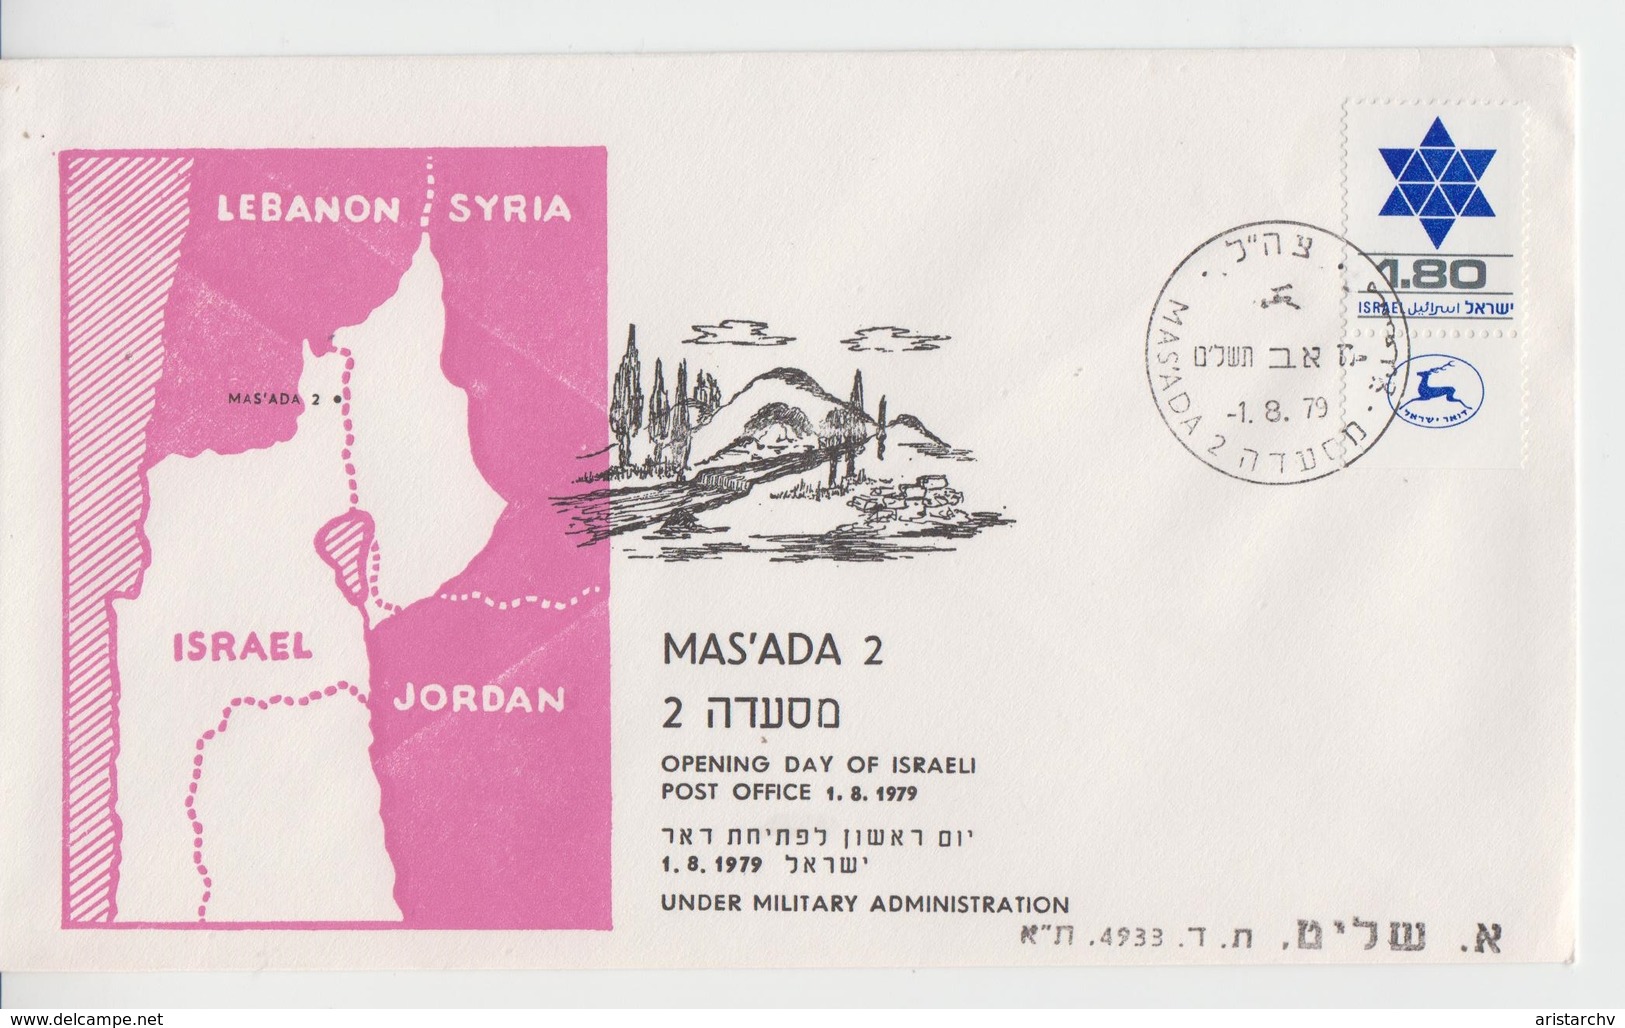 ISRAEL 1978 MASADA 2 OPENING DAY POST OFFICE UNDER MILITARY ASMINISTRATION TSAHAL IDF COVER - Timbres-taxe